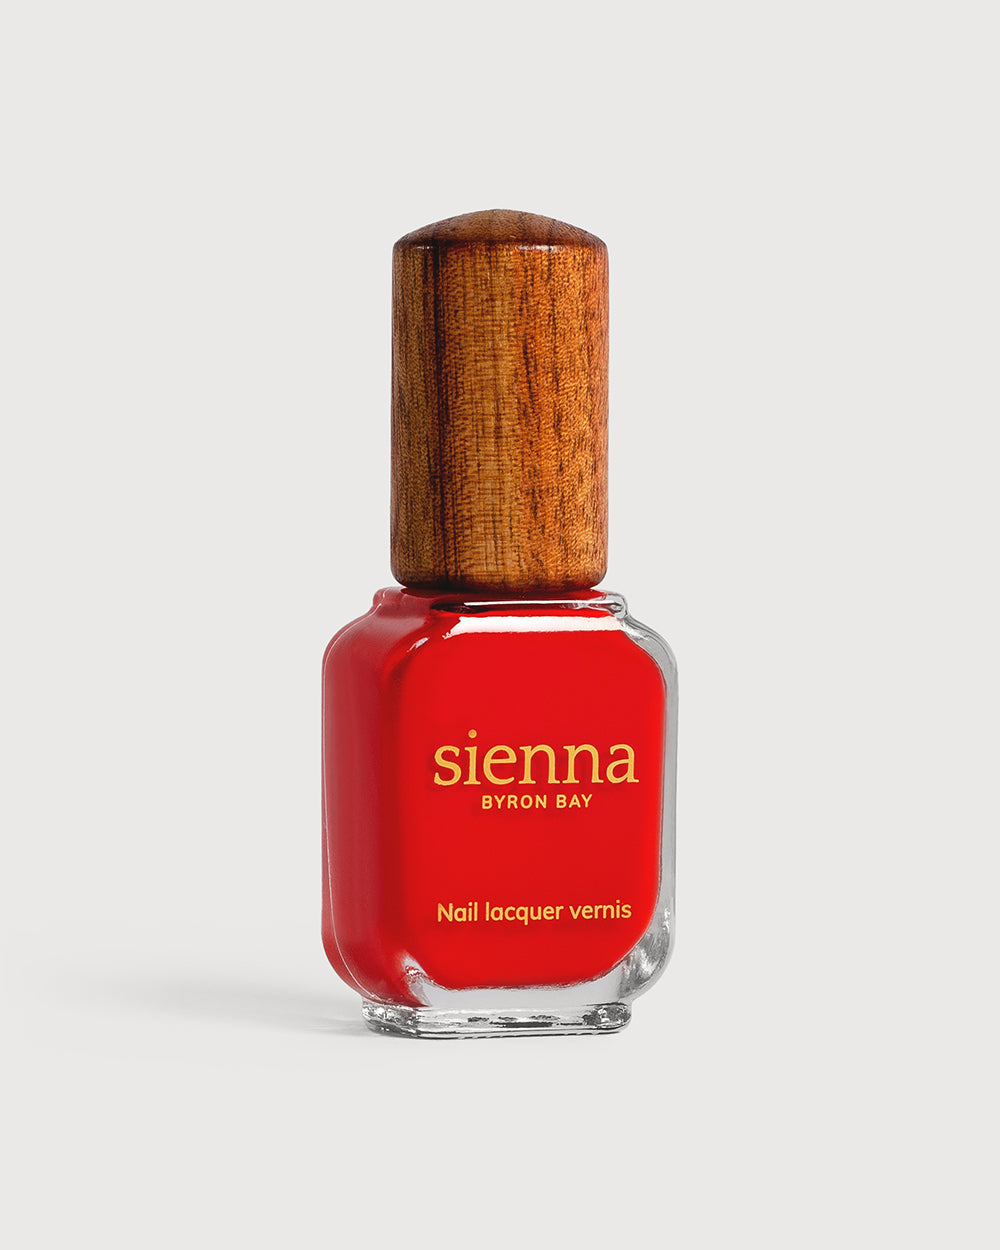 bright red nail polish glass bottle with timber cap